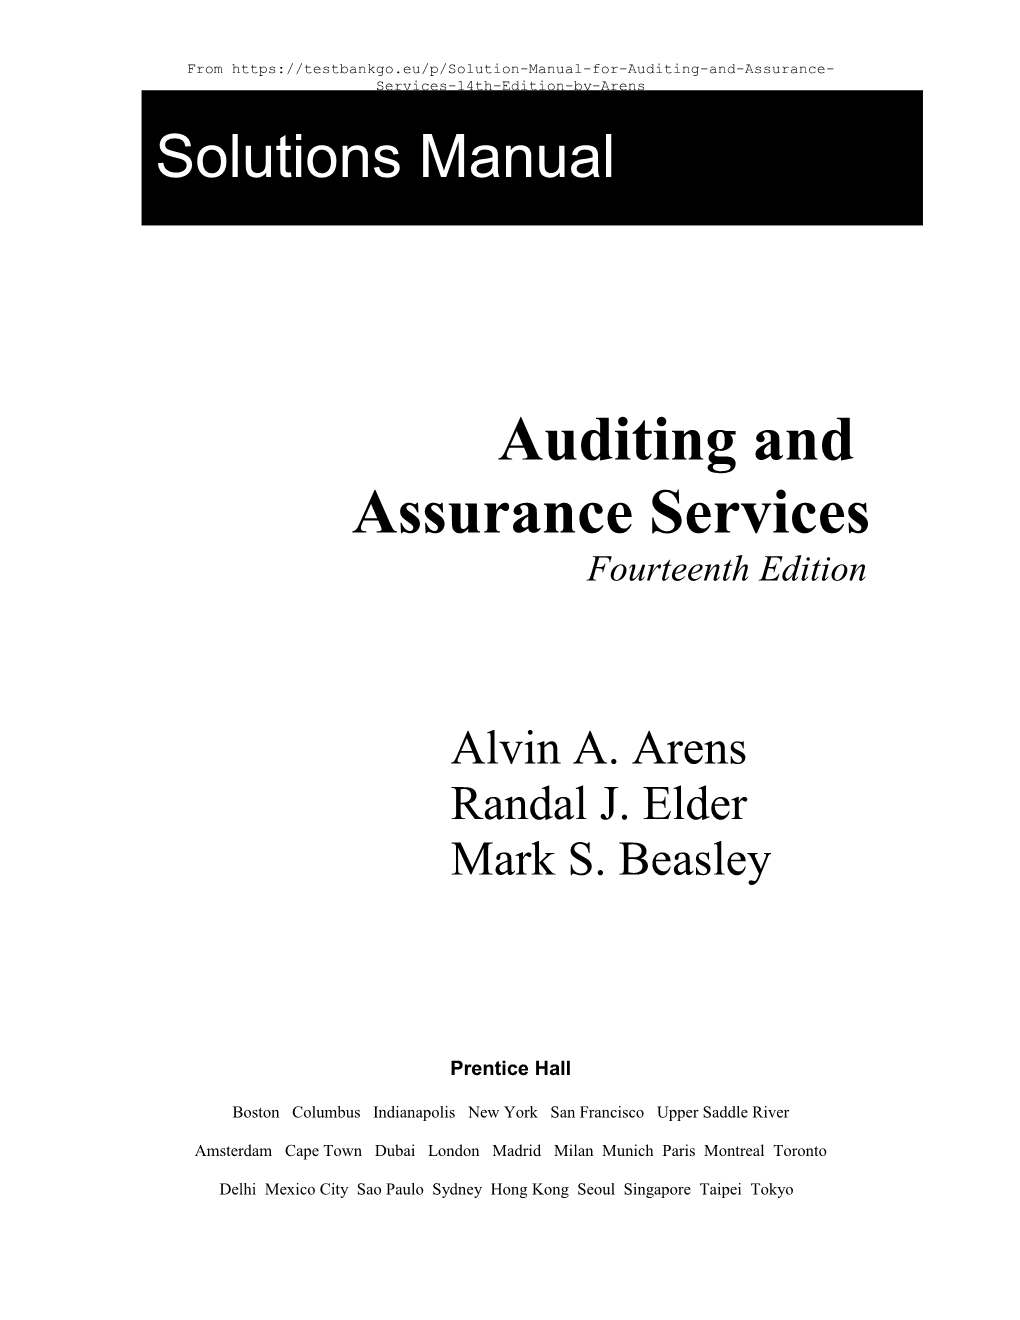 Auditing and Assuranceservices